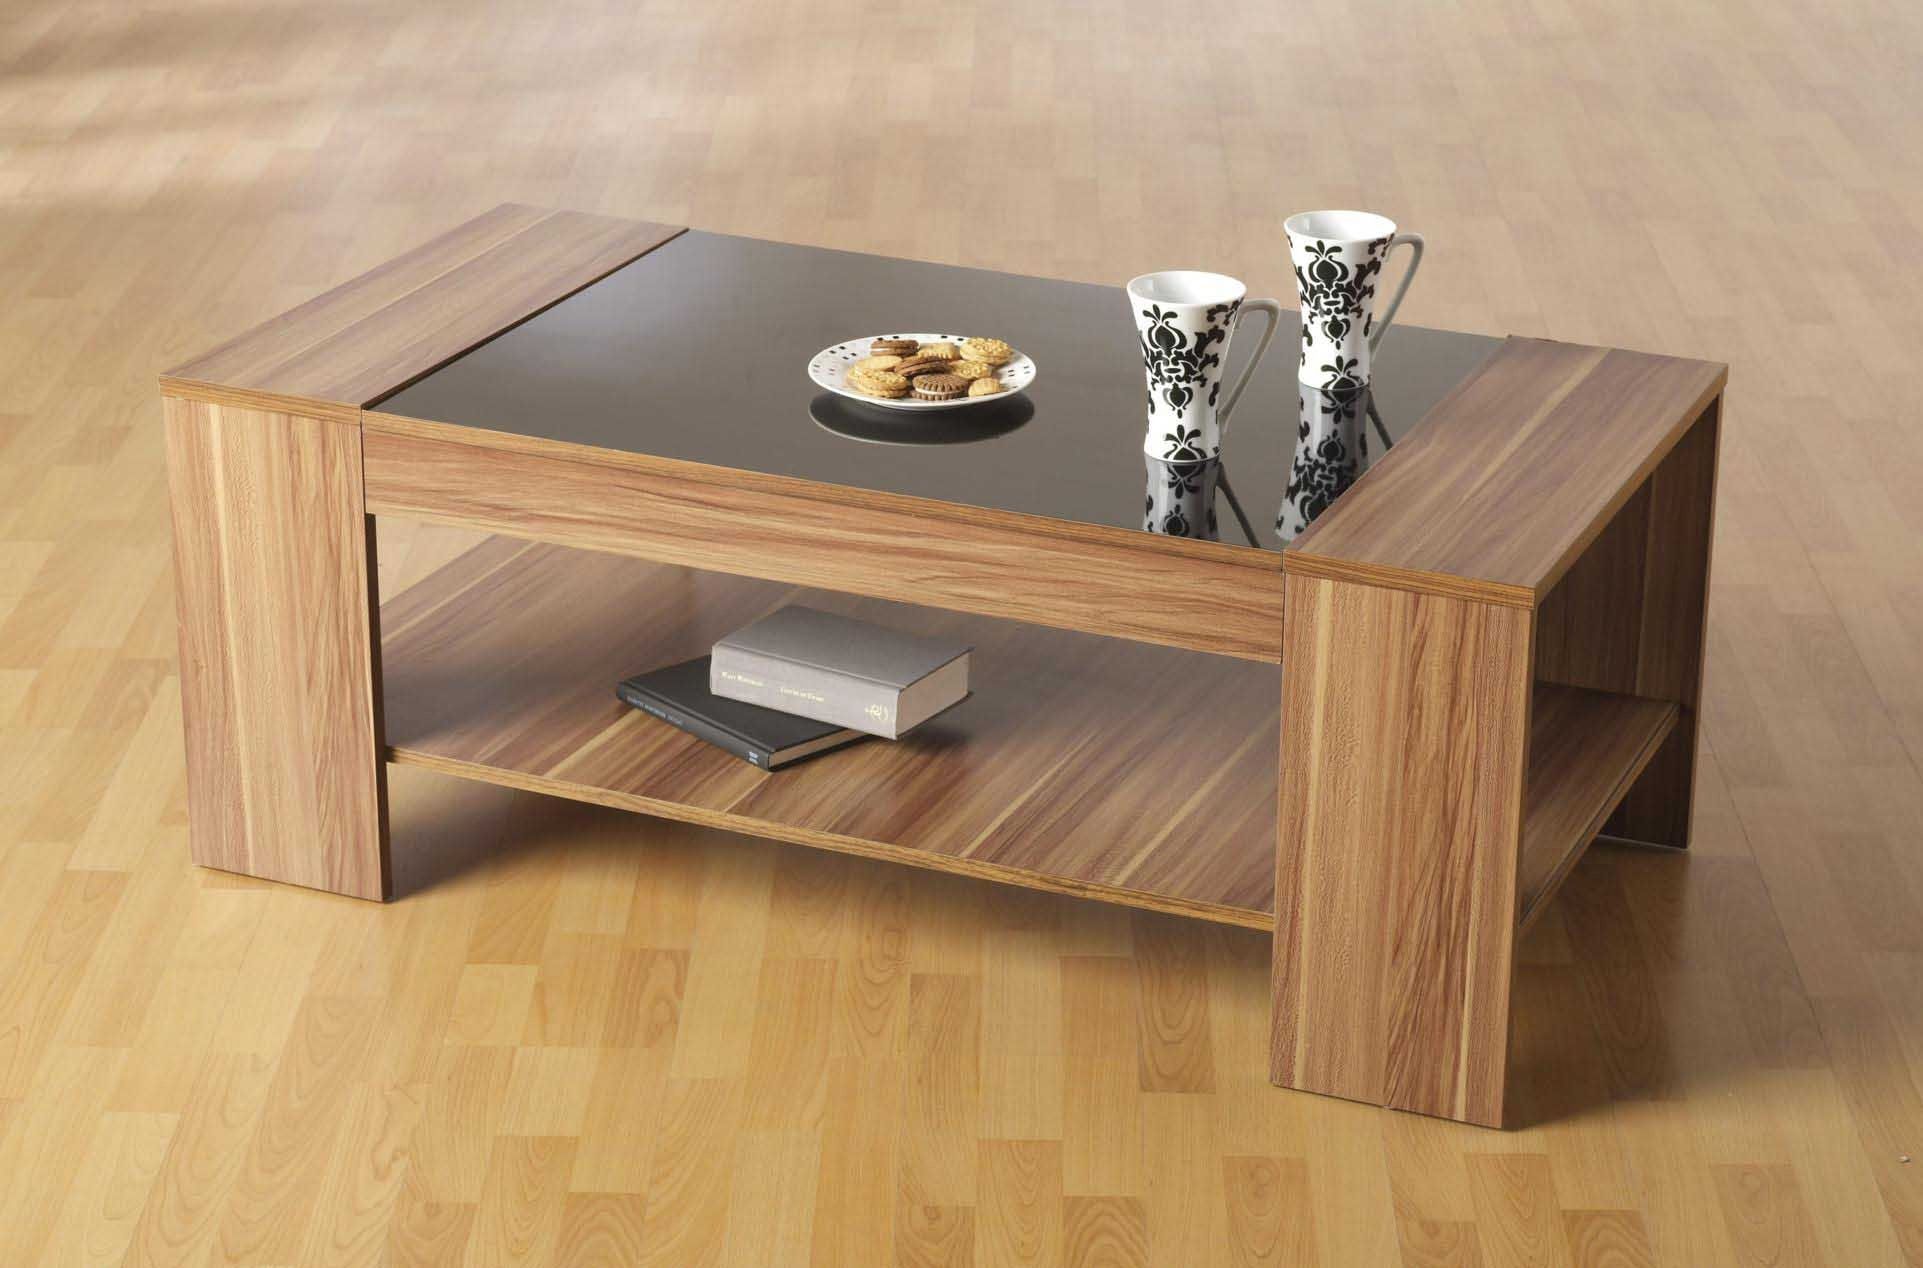 14 Square Mirrored Coffee Table Uk Inspiration With 2019 Mirrored Coffee Tables (View 20 of 20)